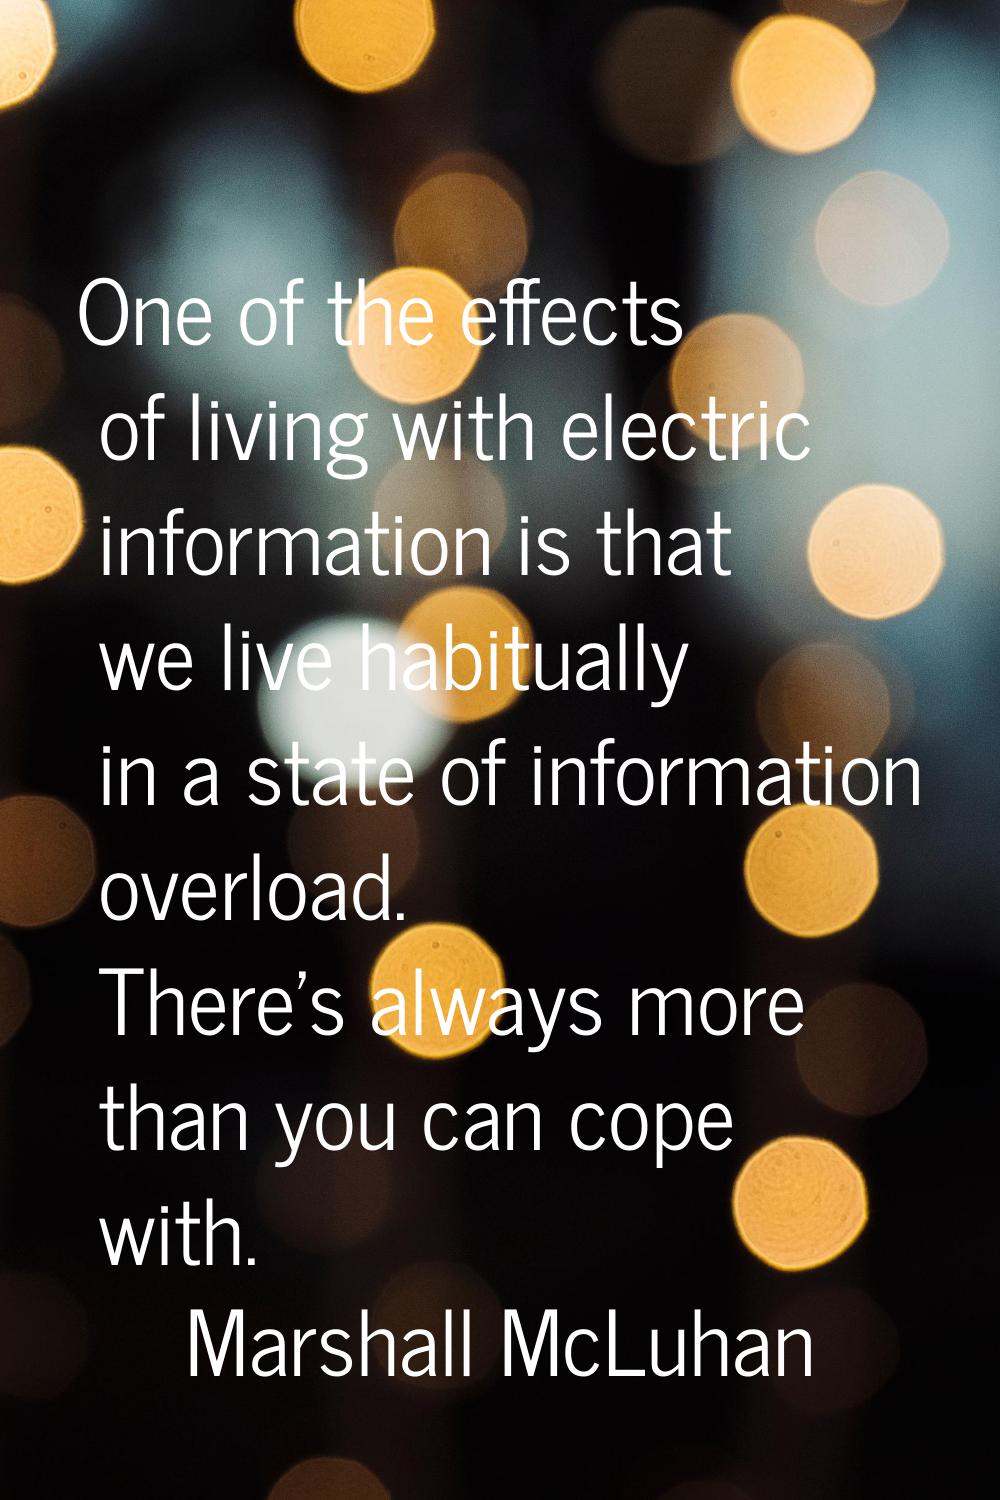 One of the effects of living with electric information is that we live habitually in a state of inf